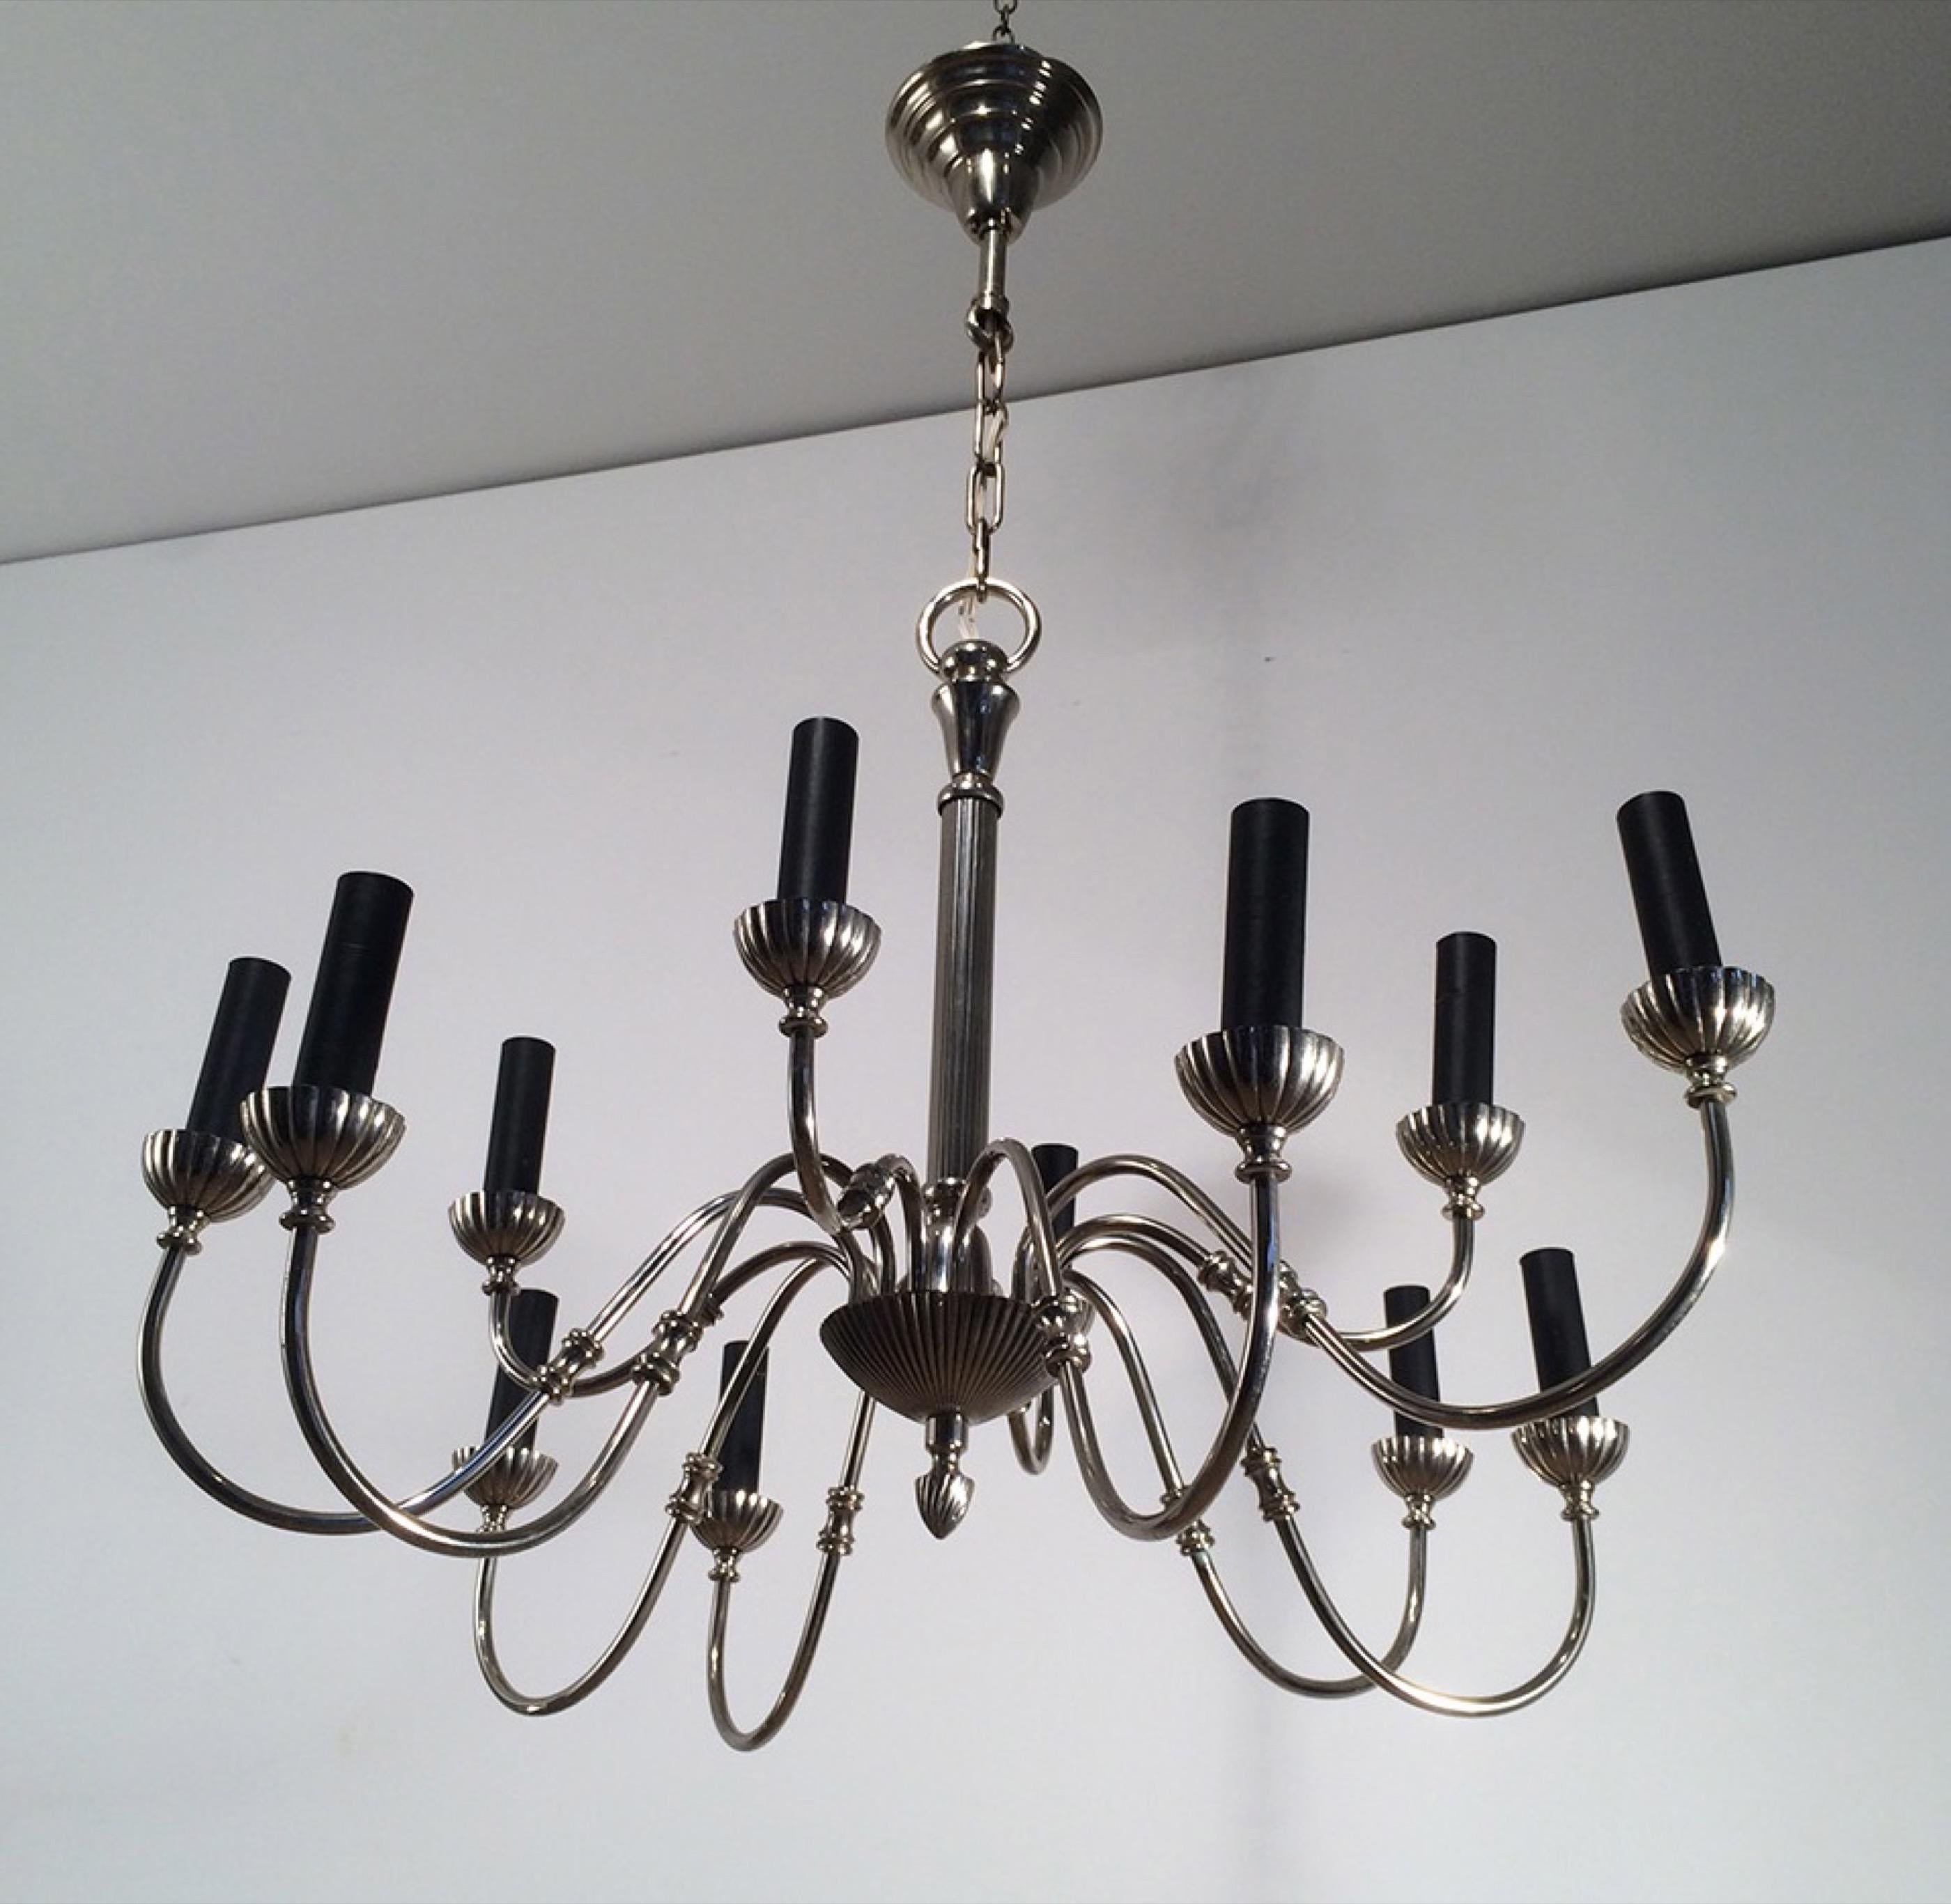 Silver Plated 12-Light Neoclassical Chandelier, circa 1940 For Sale 5